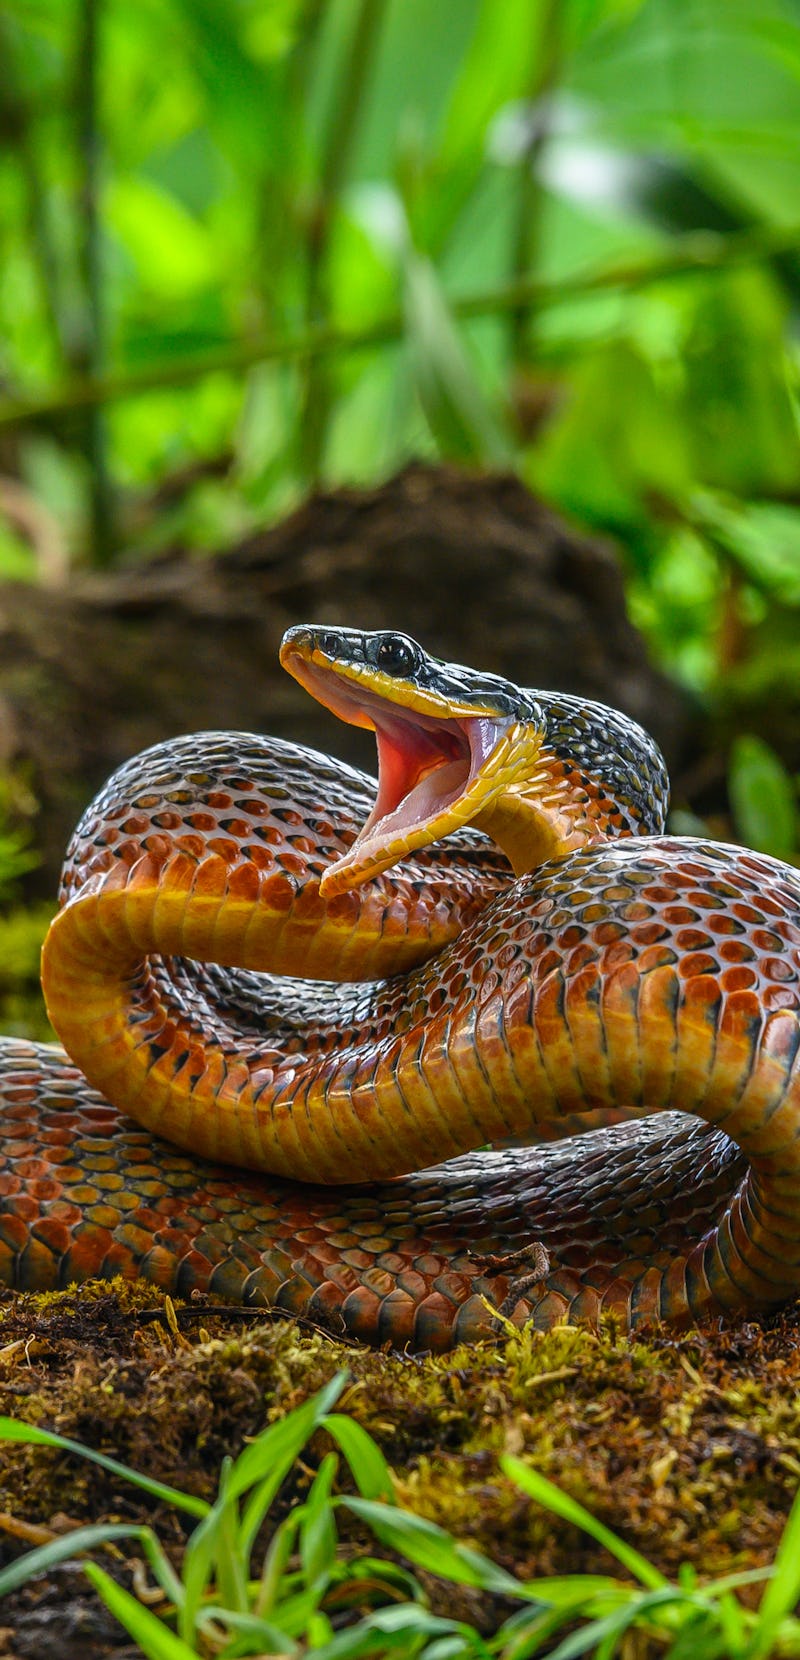 Puffing Snake - Phrynonax poecilonotus is a species of nonvenomous snake in the family Colubridae. T...